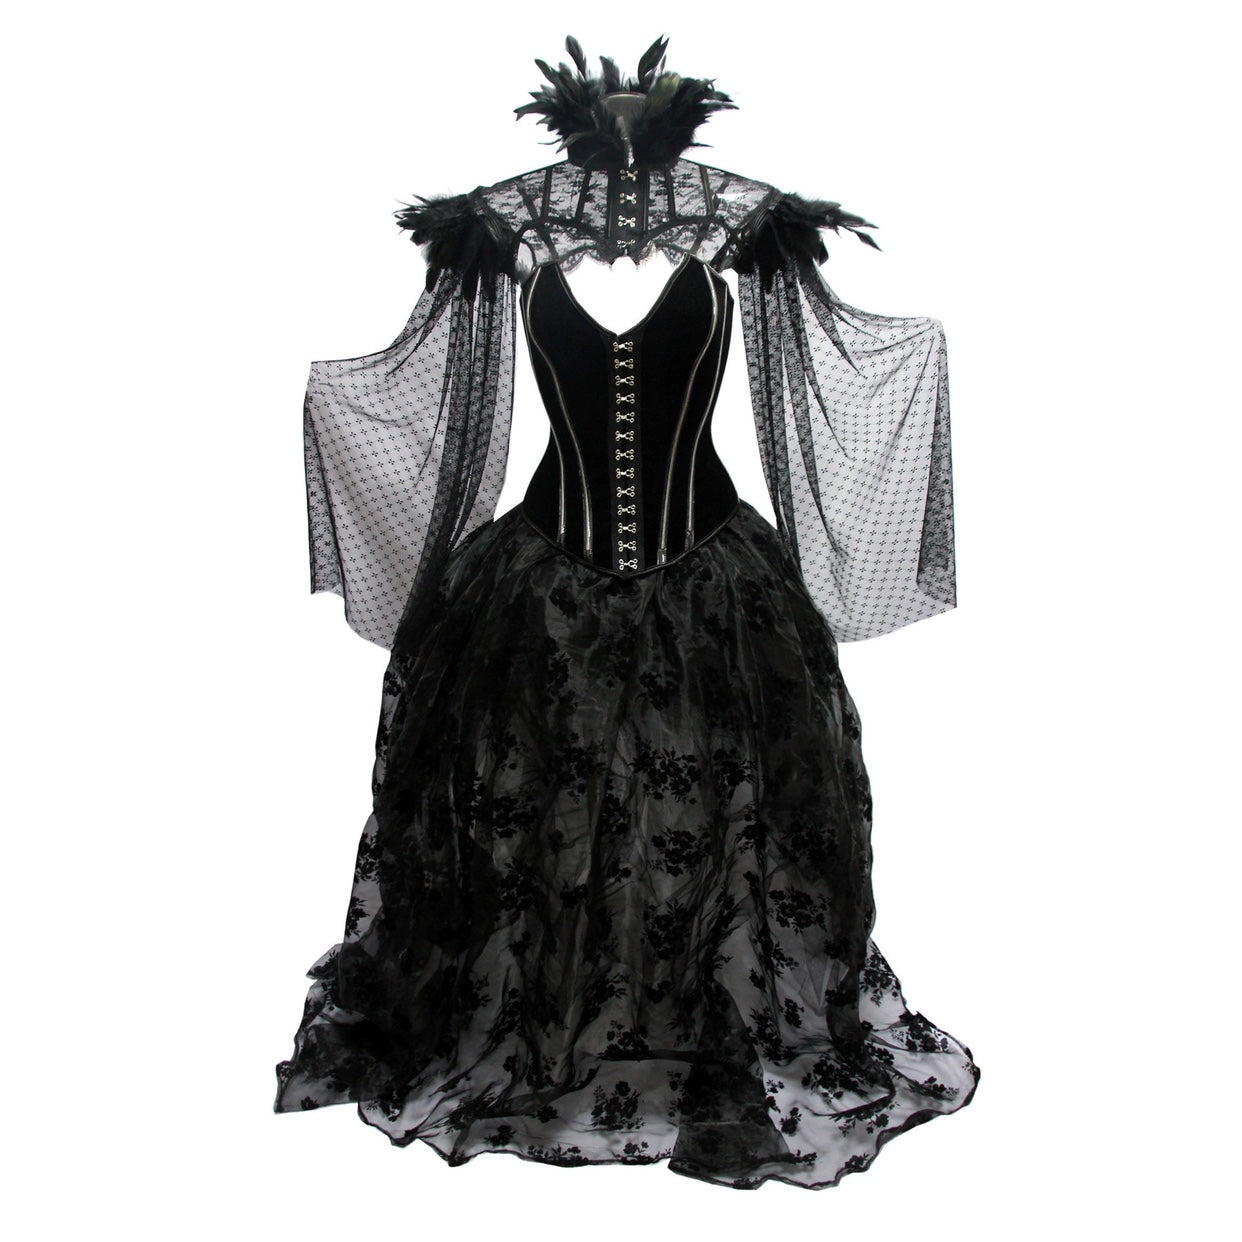 A Gothic Floor-Length Skirt Punk Dark Stage Catwalk corset with feathers on it by Maramalive™.